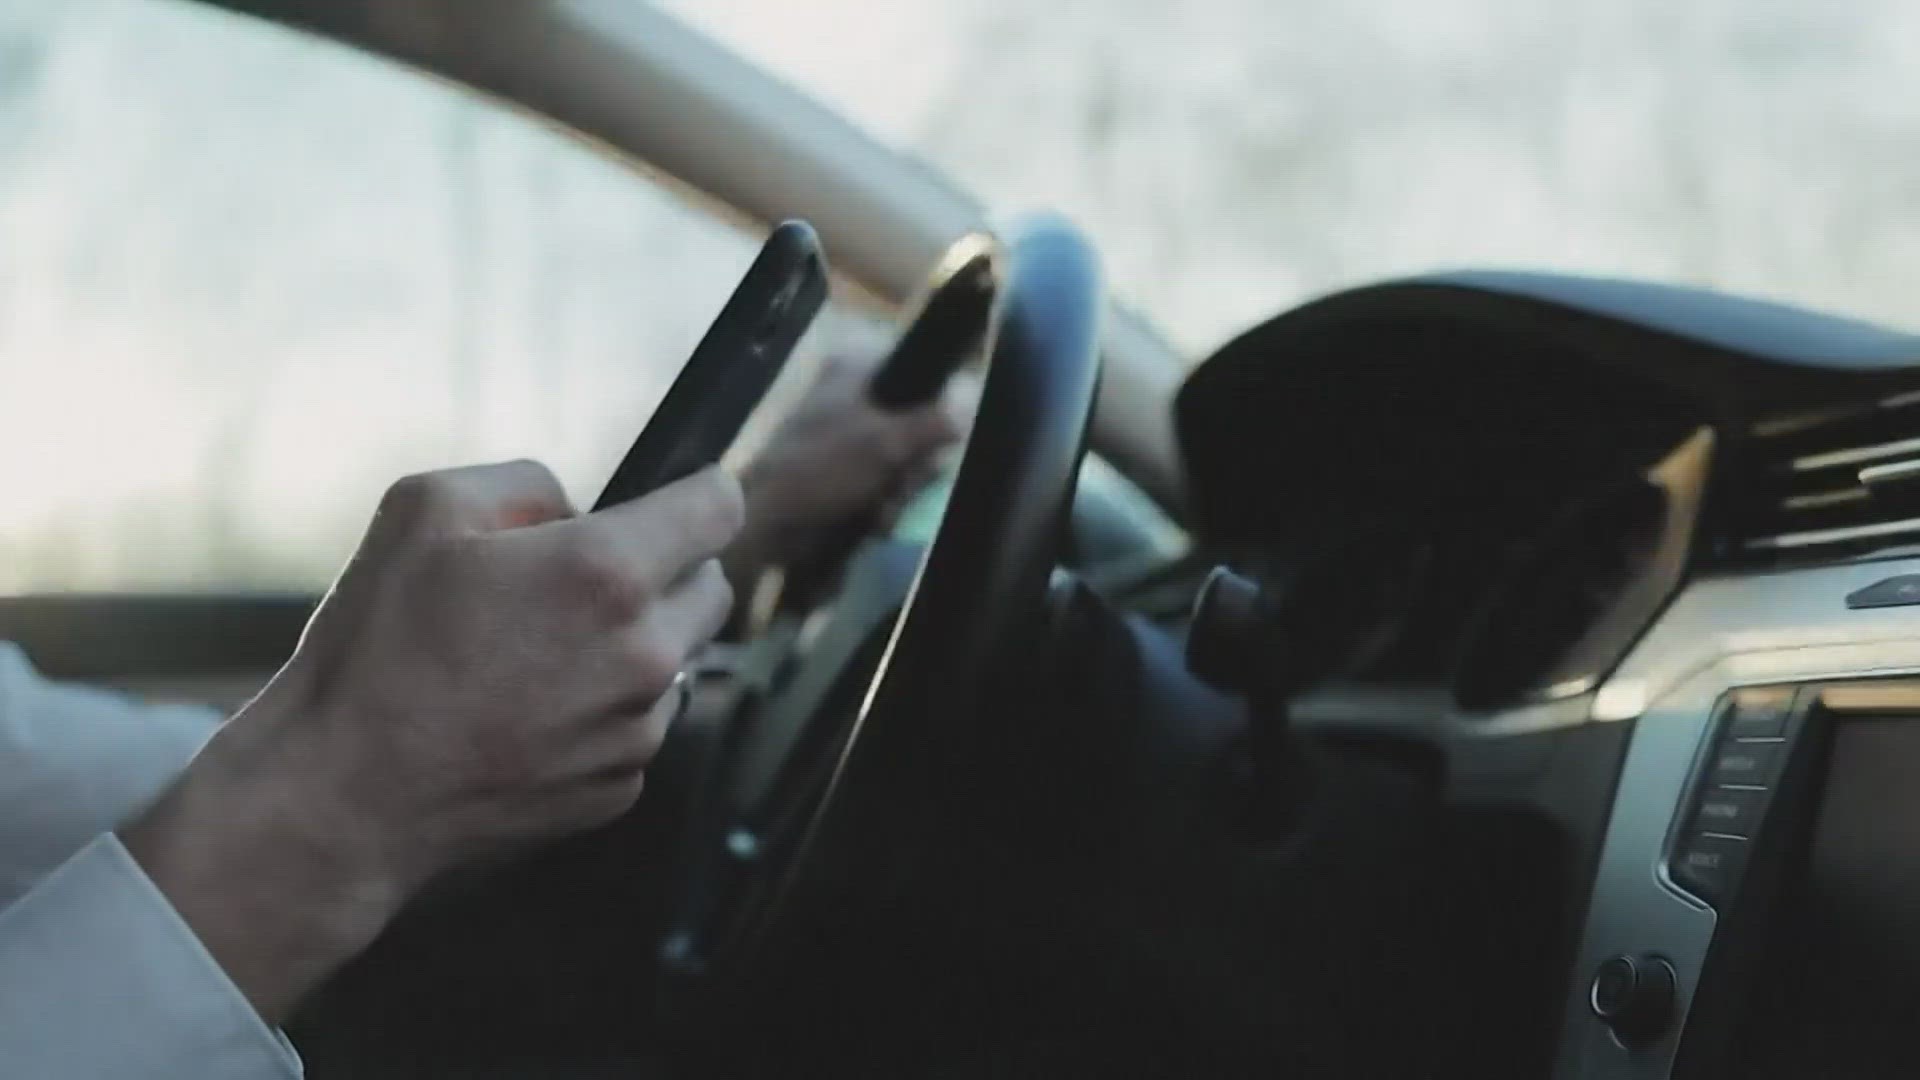 Drivers caught using a handheld device while driving could have been fined $500 for a first offense, up from $85, and $1,000 for a second, up from $250.